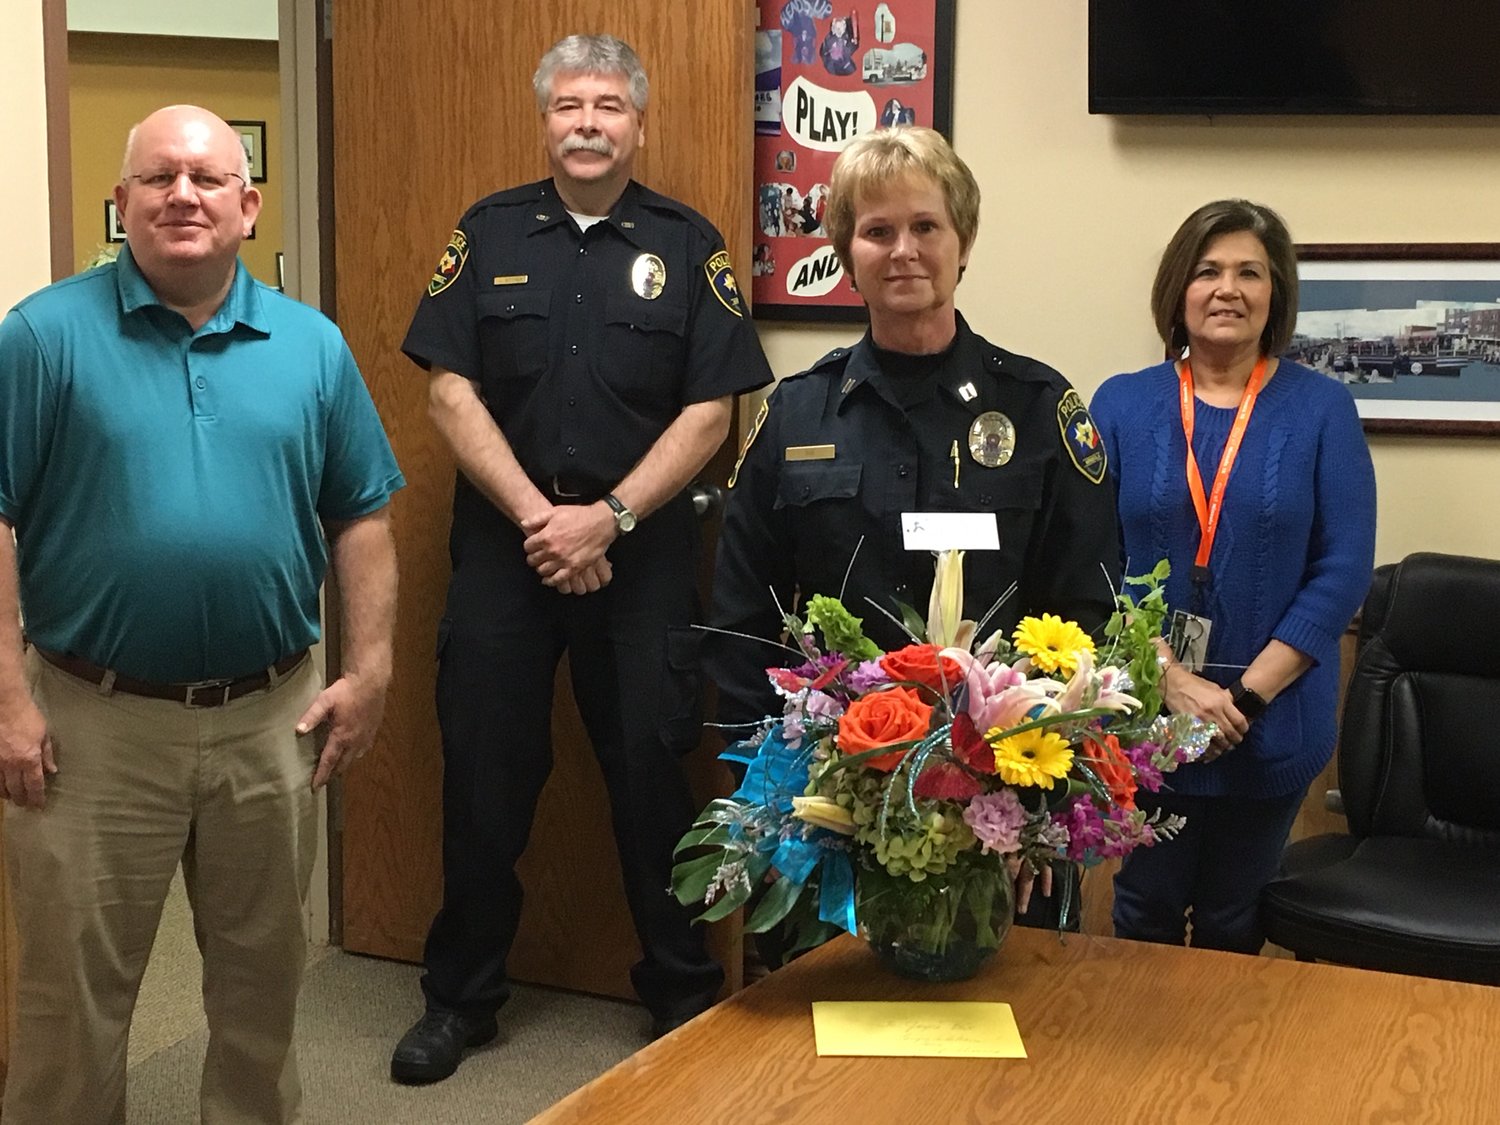 The retirement party of Mineola Police Capt. Joyce Box last week had to be scaled back. From left are Mayor Kevin White, Police Chief Chuck Bittner, Box and City Manager Mercy Rushing.